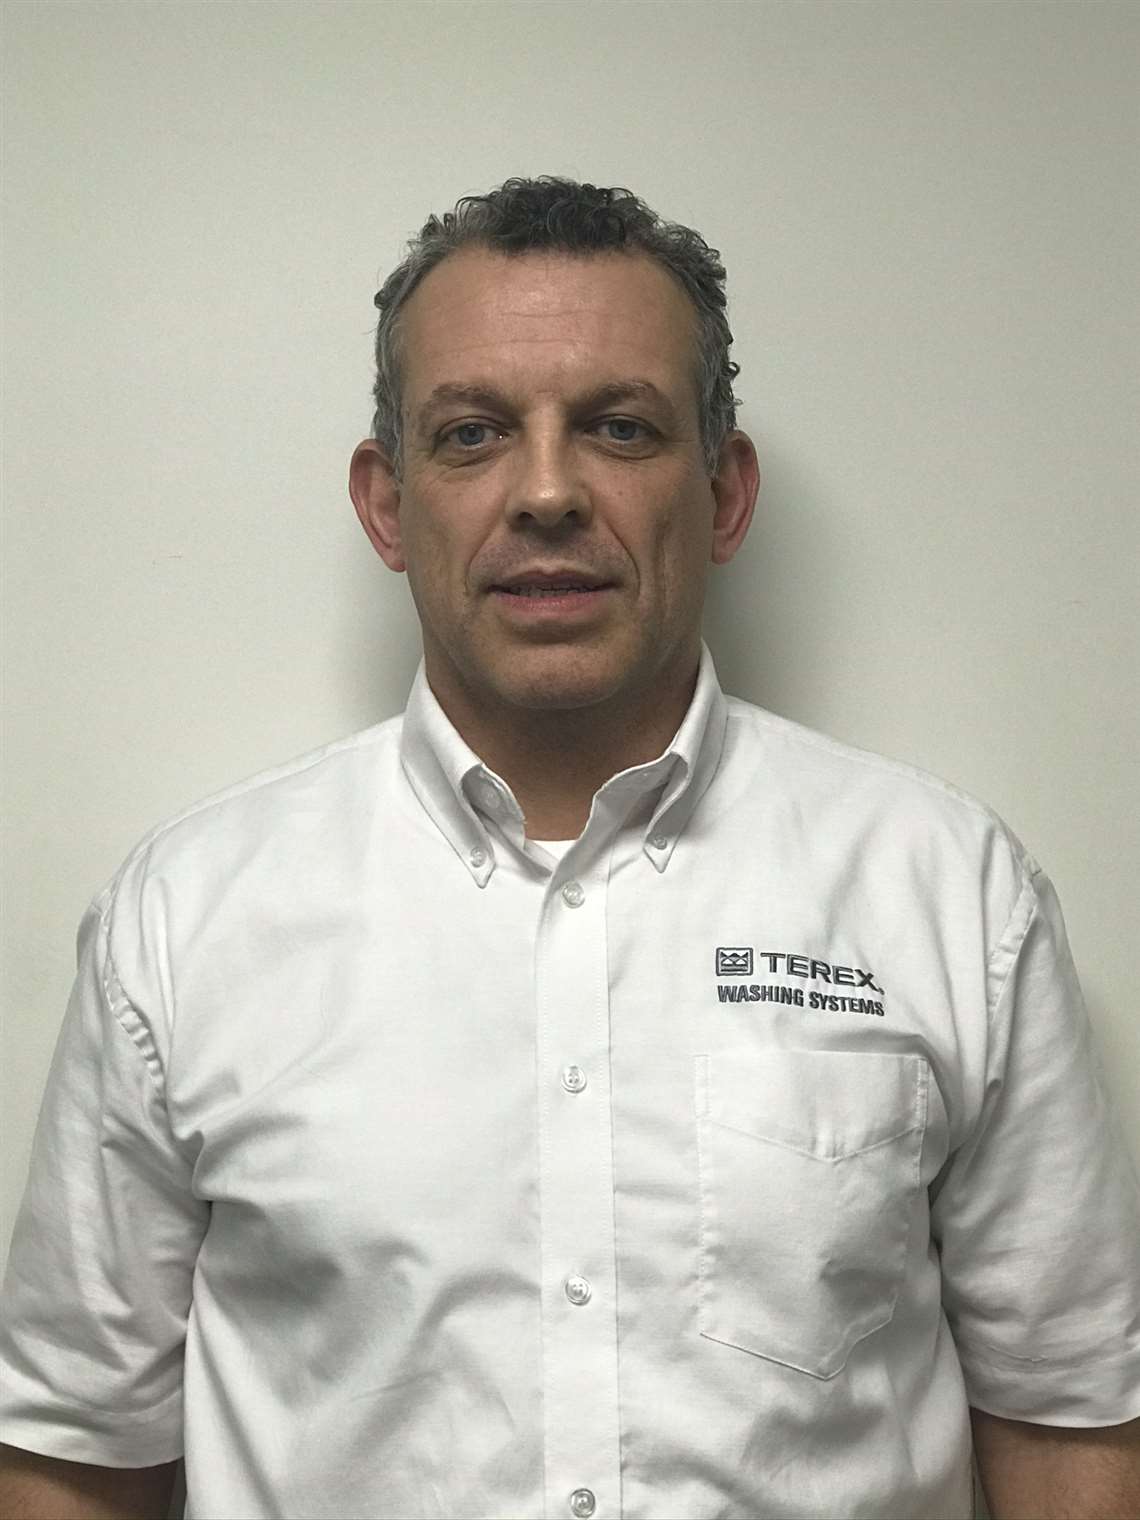 Martin Loughran, new Terex Washing Systems Sales Manager for Ireland